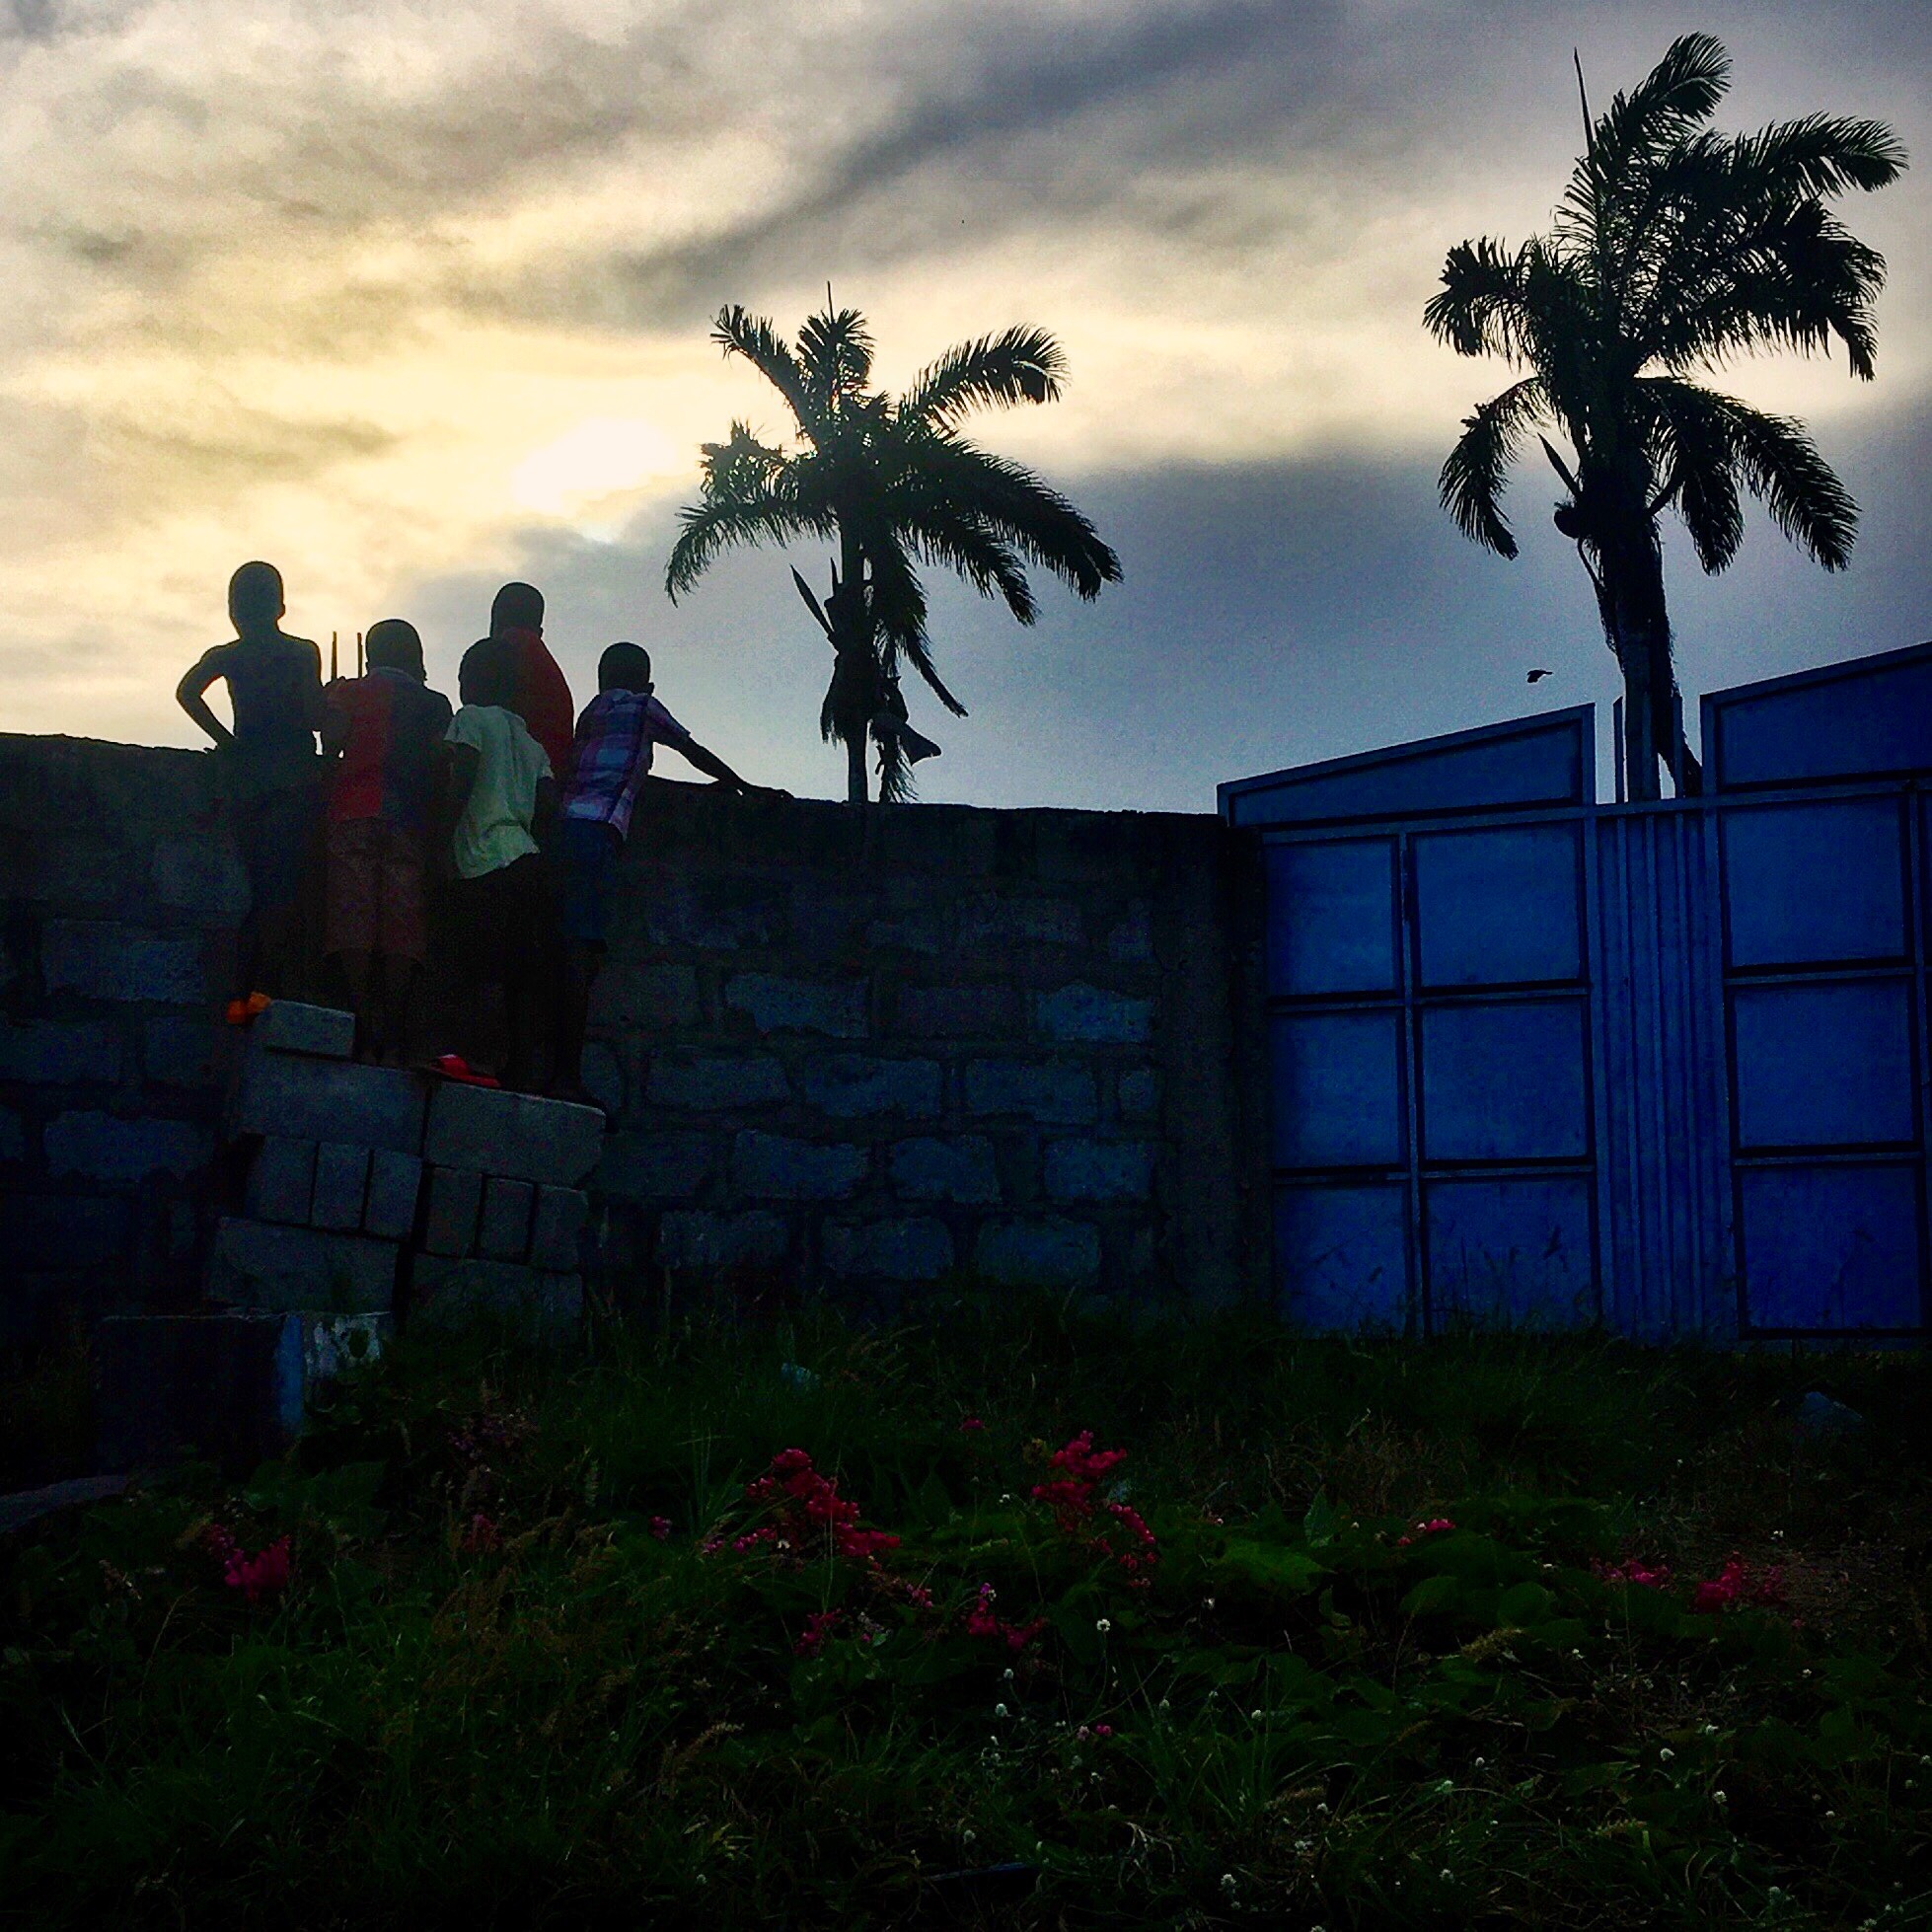 a group of children peering over a wall and palm trees silhouetted against a sunset sky